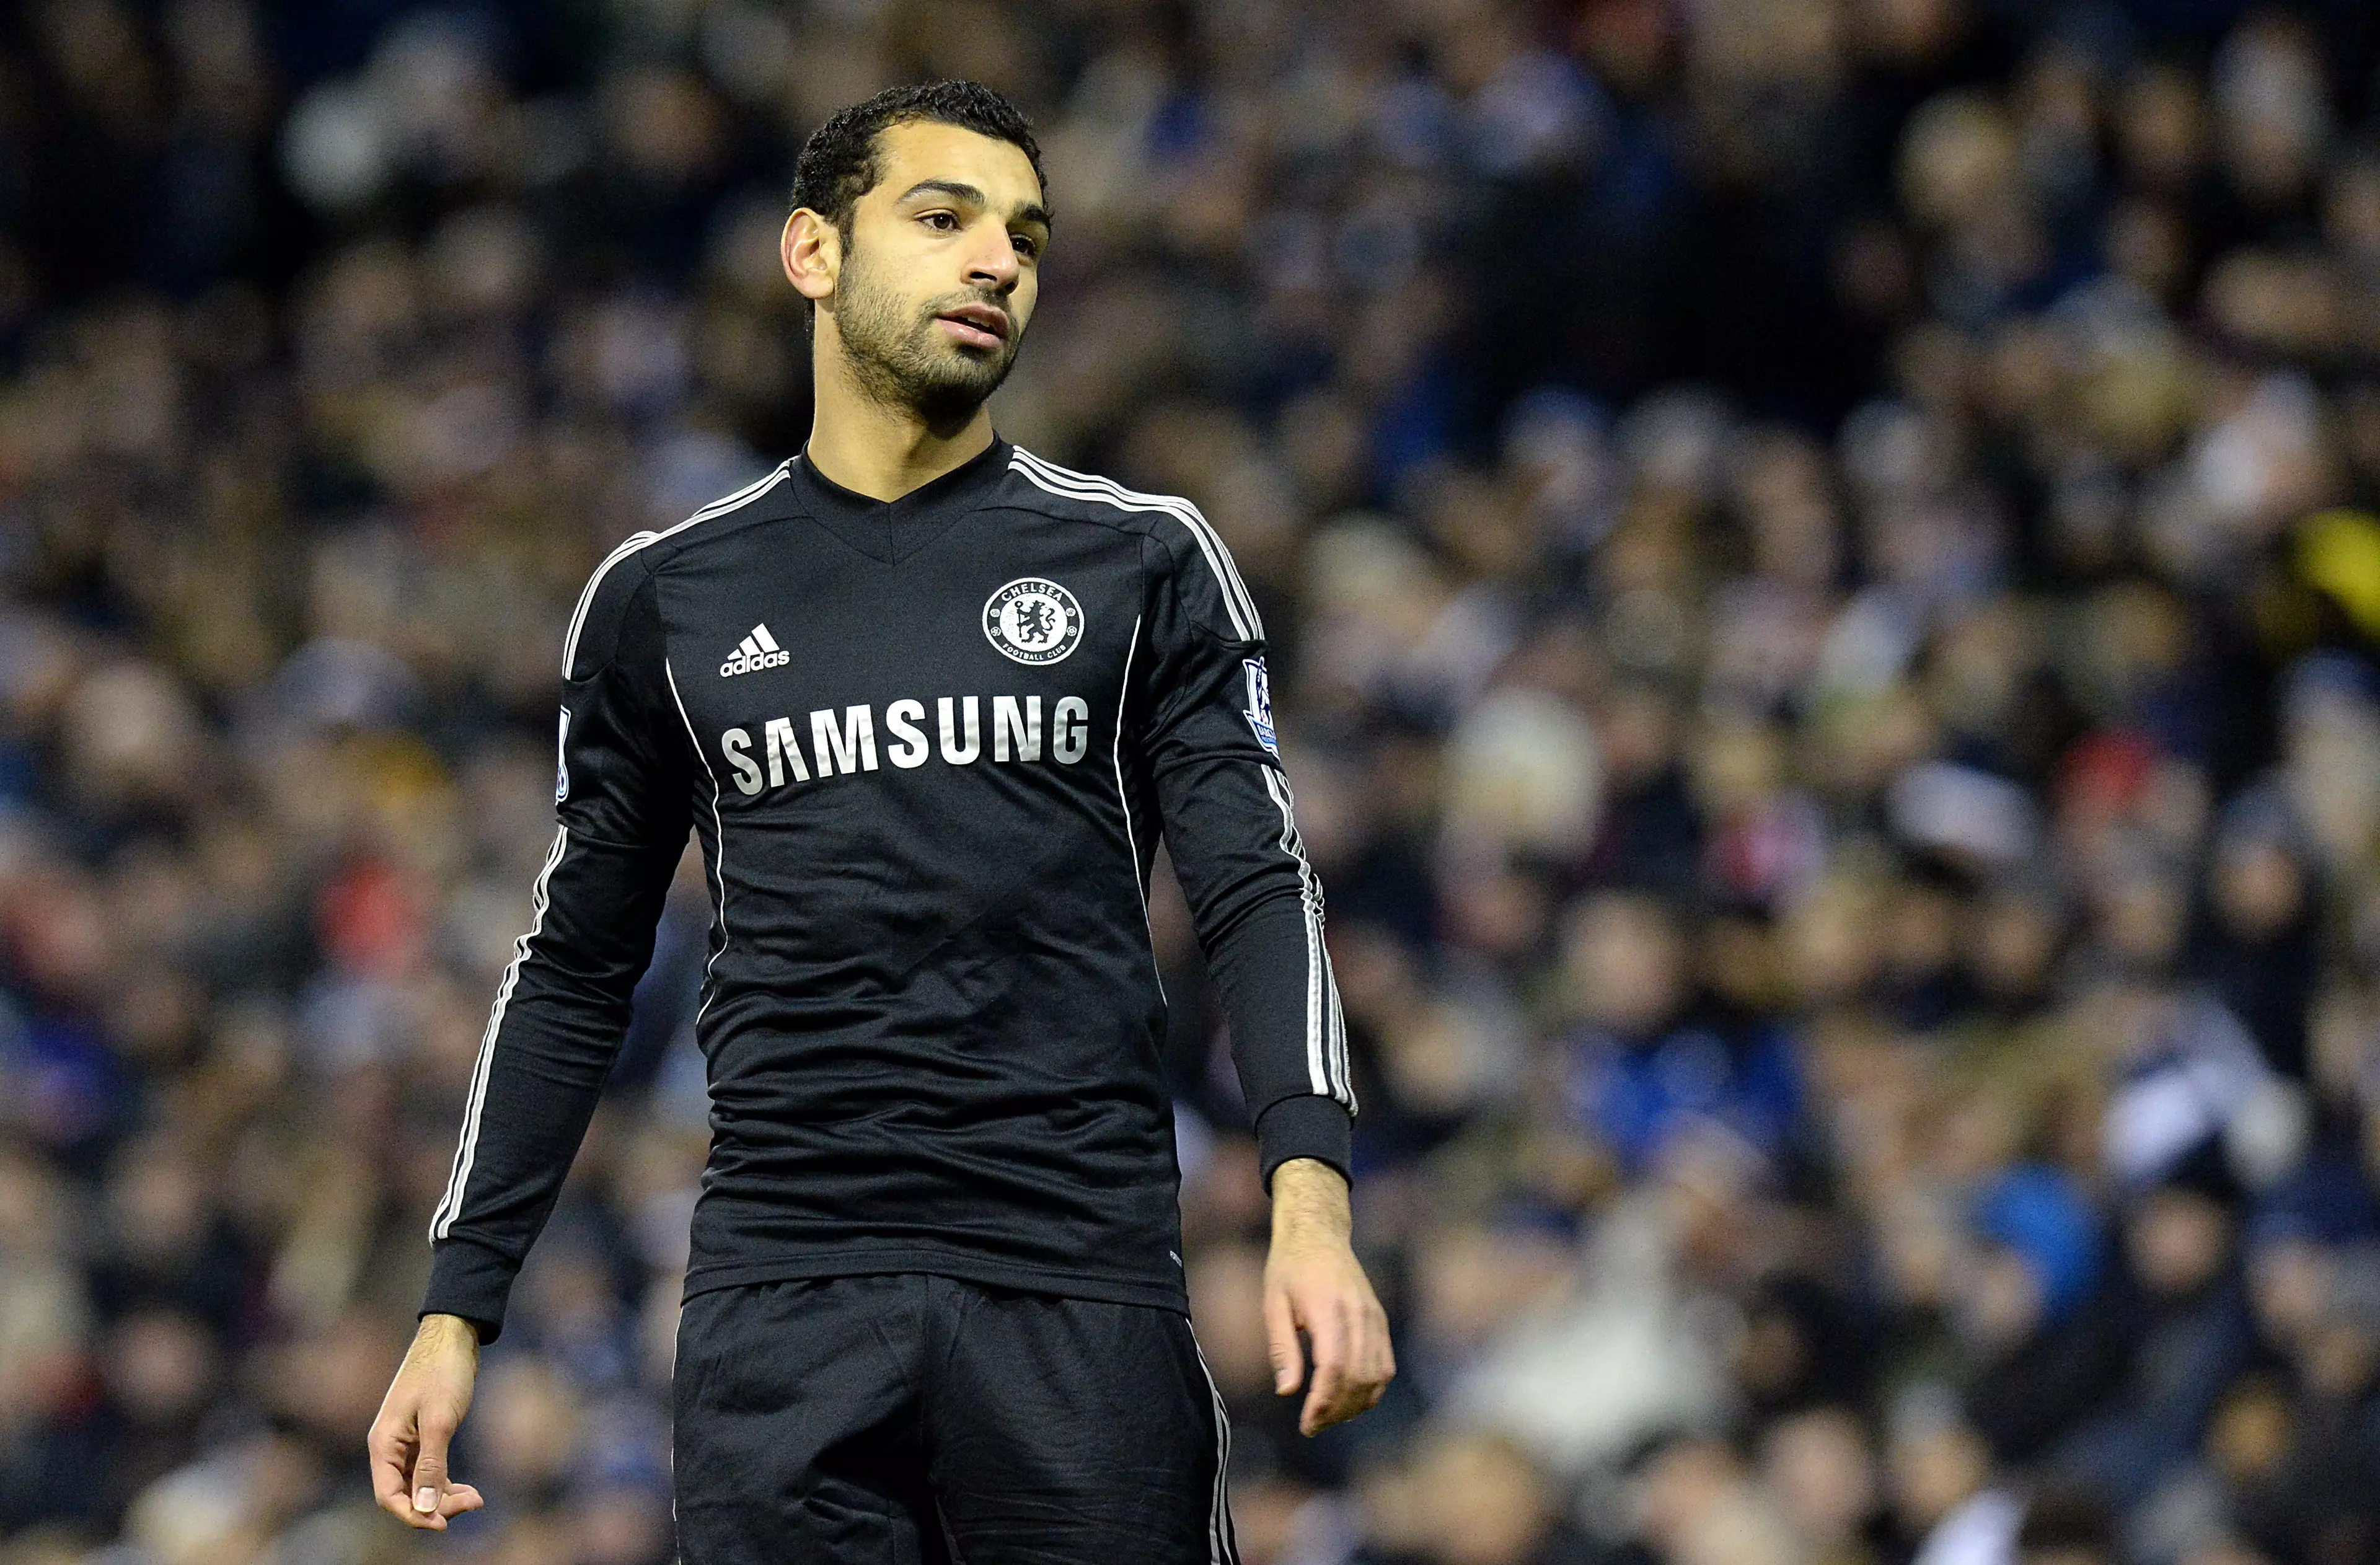 Salah in action for Chelsea in 2014. Image: PA